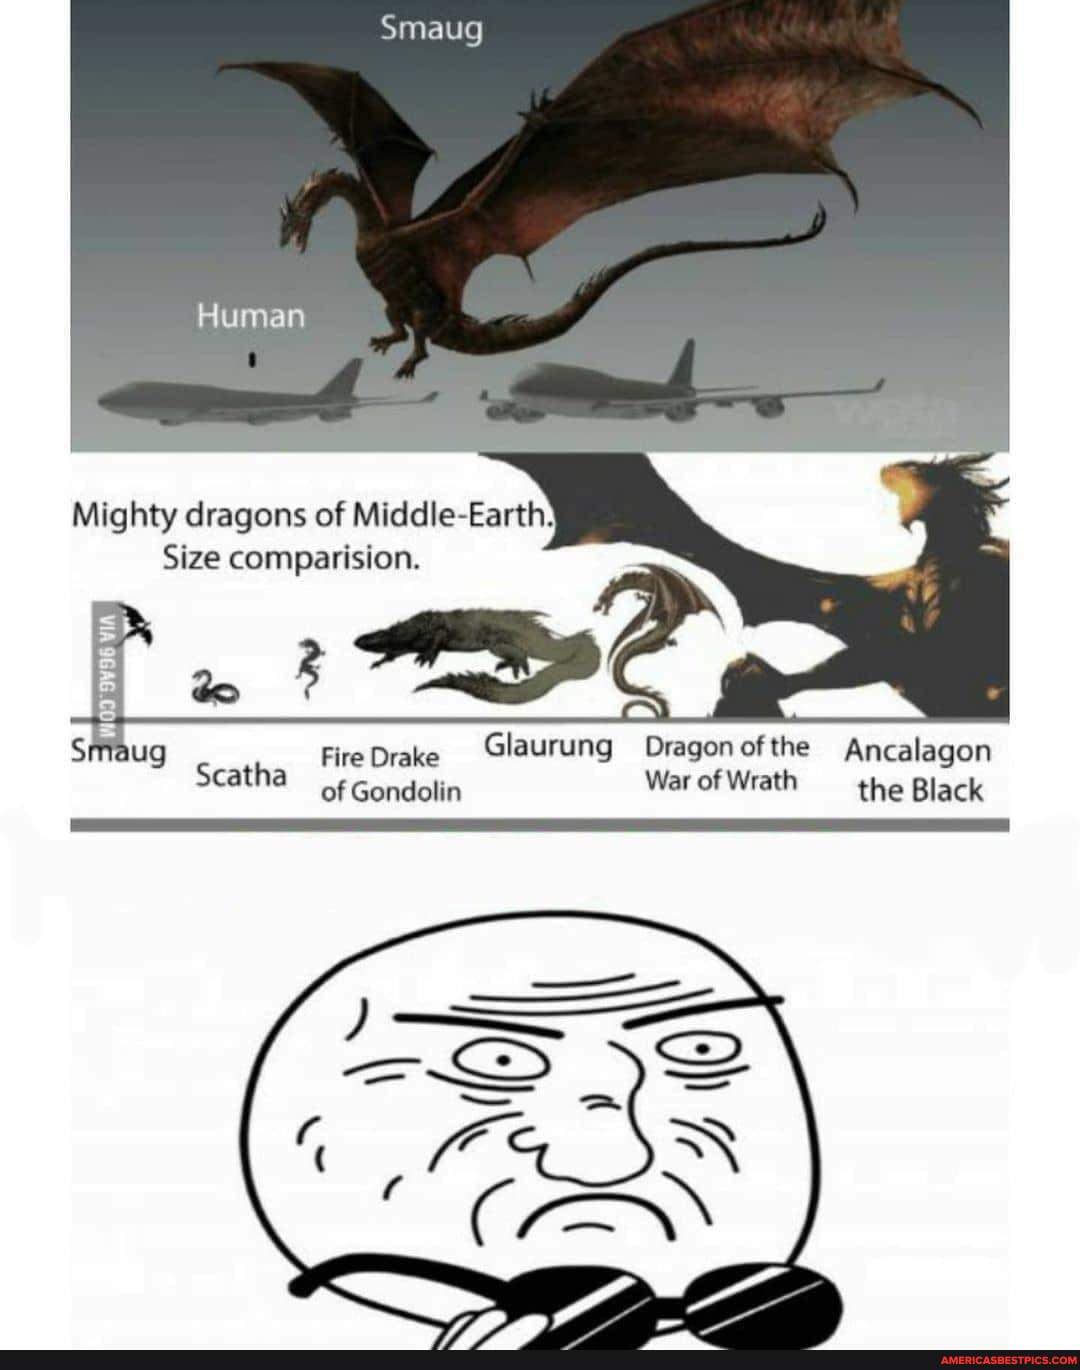 Smaug Mighty dragons of Middle-Earth Size comparision. Fire Drake Glaurung  Dragon ofthe Ancalagon Scatha Gondokn Woe of Wrath the Black MOTHER OF GOD  - iFunny Brazil